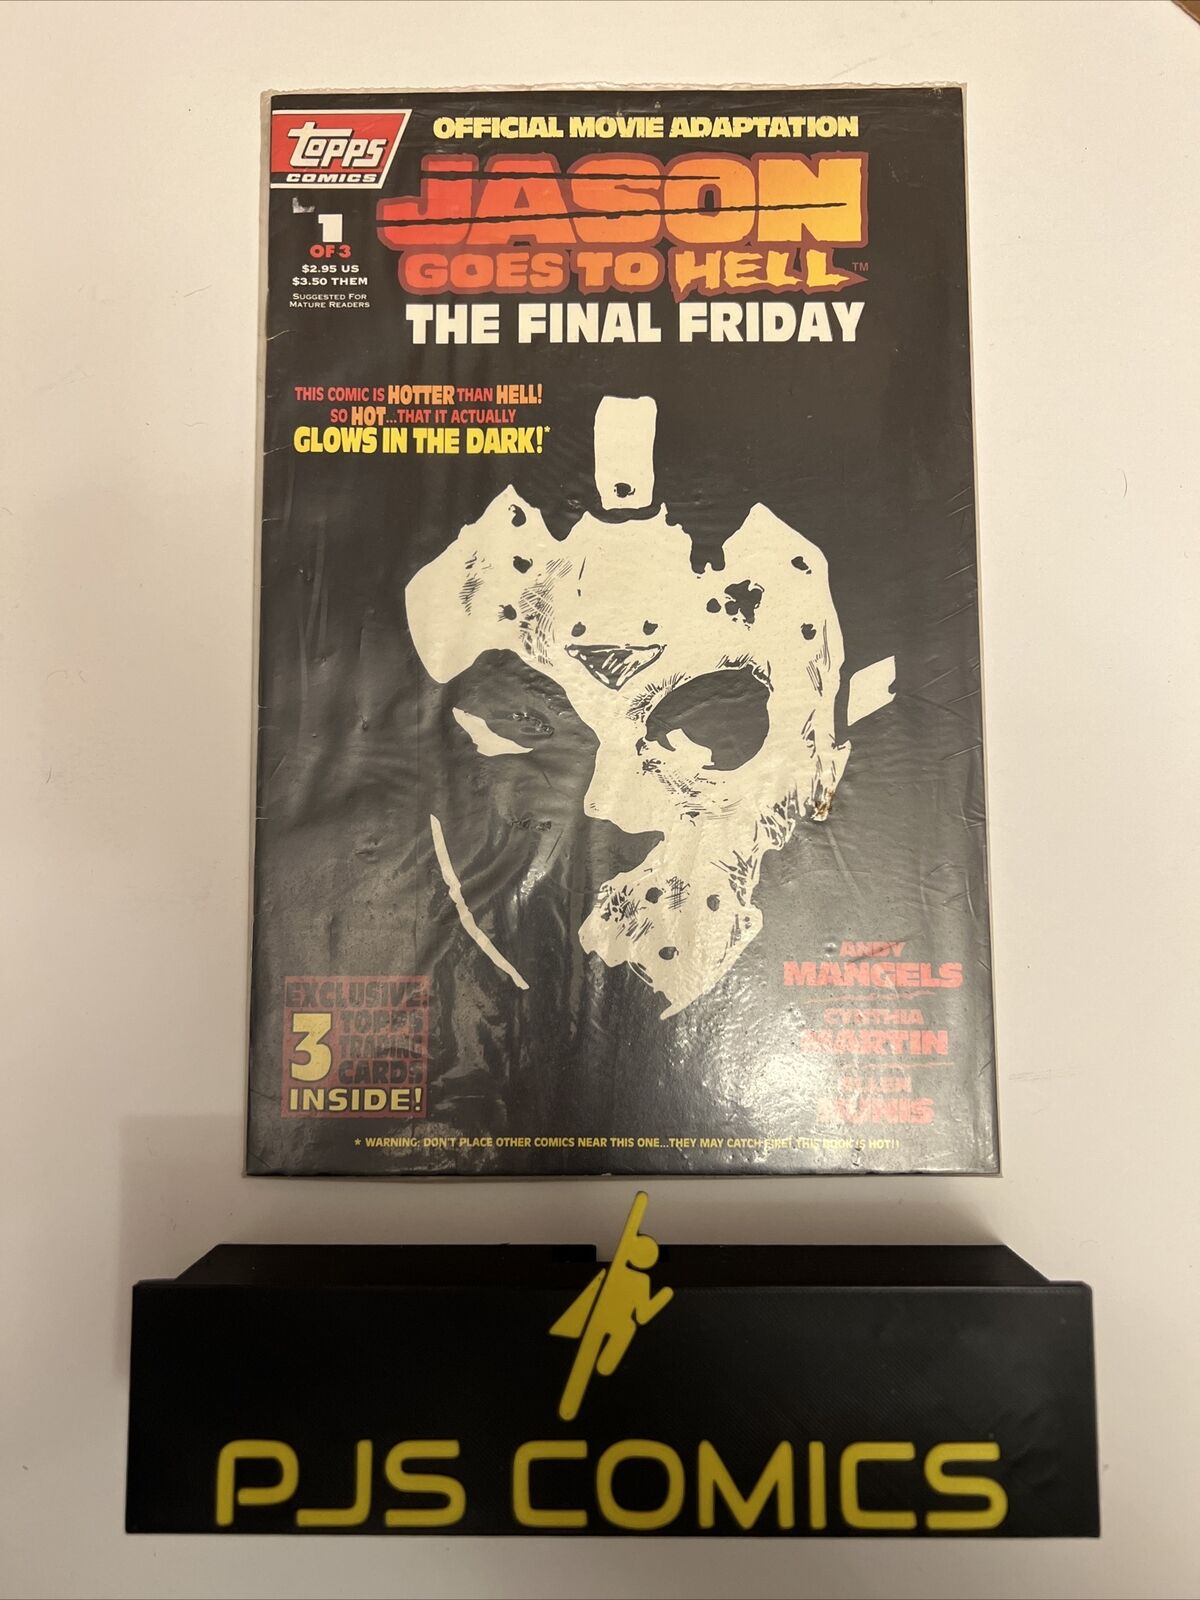 JASON GOES TO HELL THE FINAL FRIDAY COMIC #1 MOVIE ADAPTATION VOORHEES TOPPS OOP